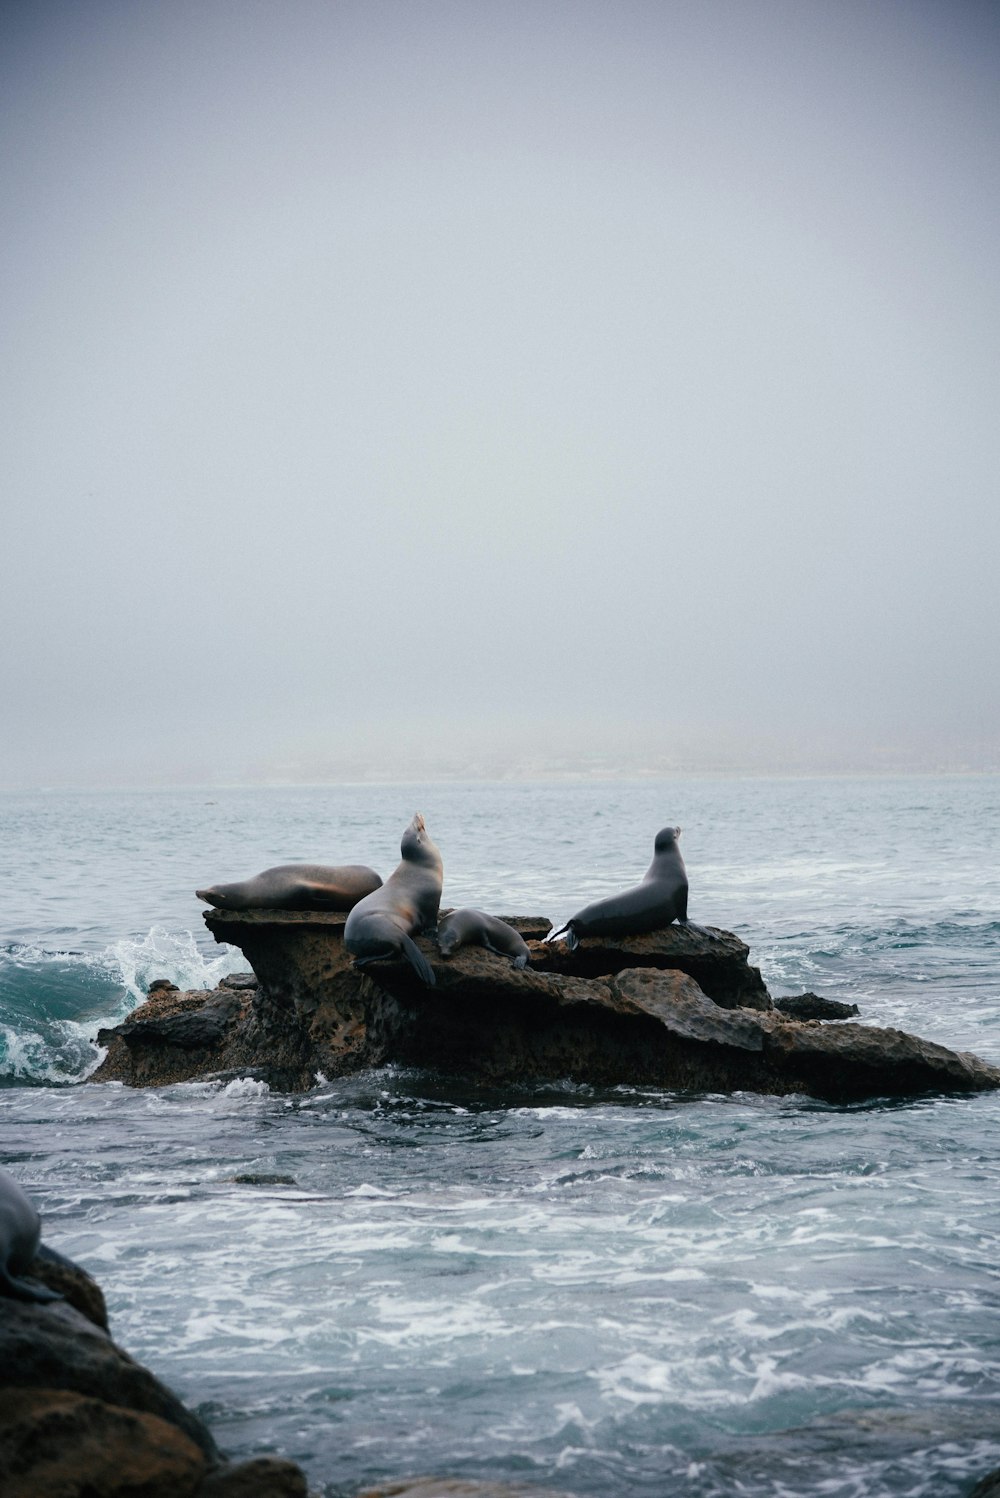 three seagulls sitting on a rock in the ocean